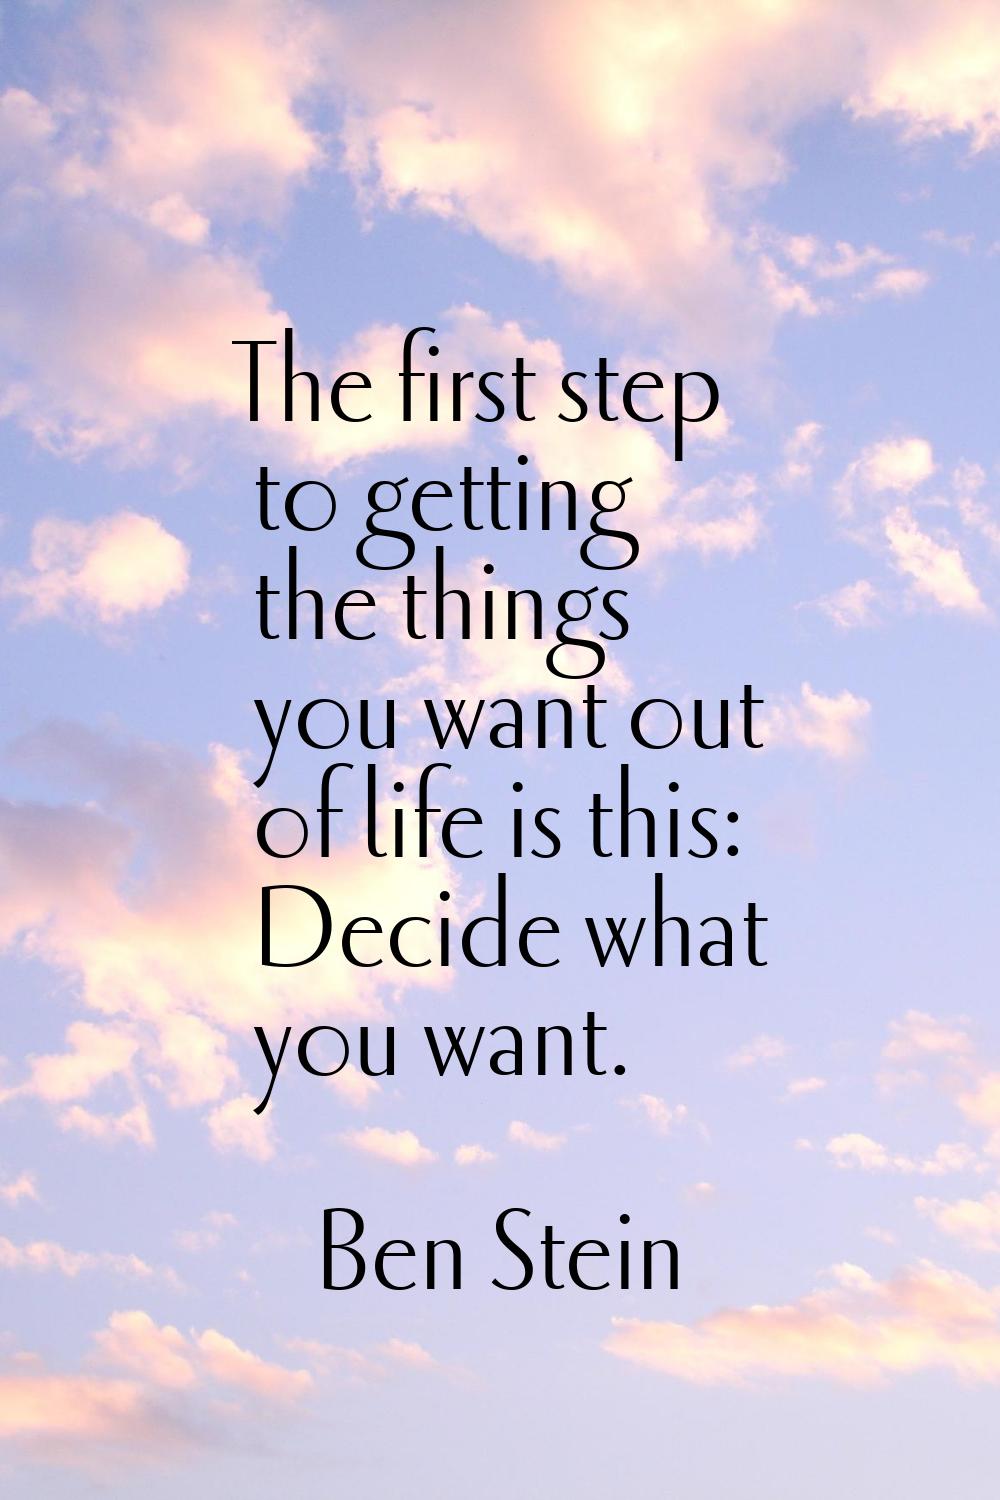 The first step to getting the things you want out of life is this: Decide what you want.